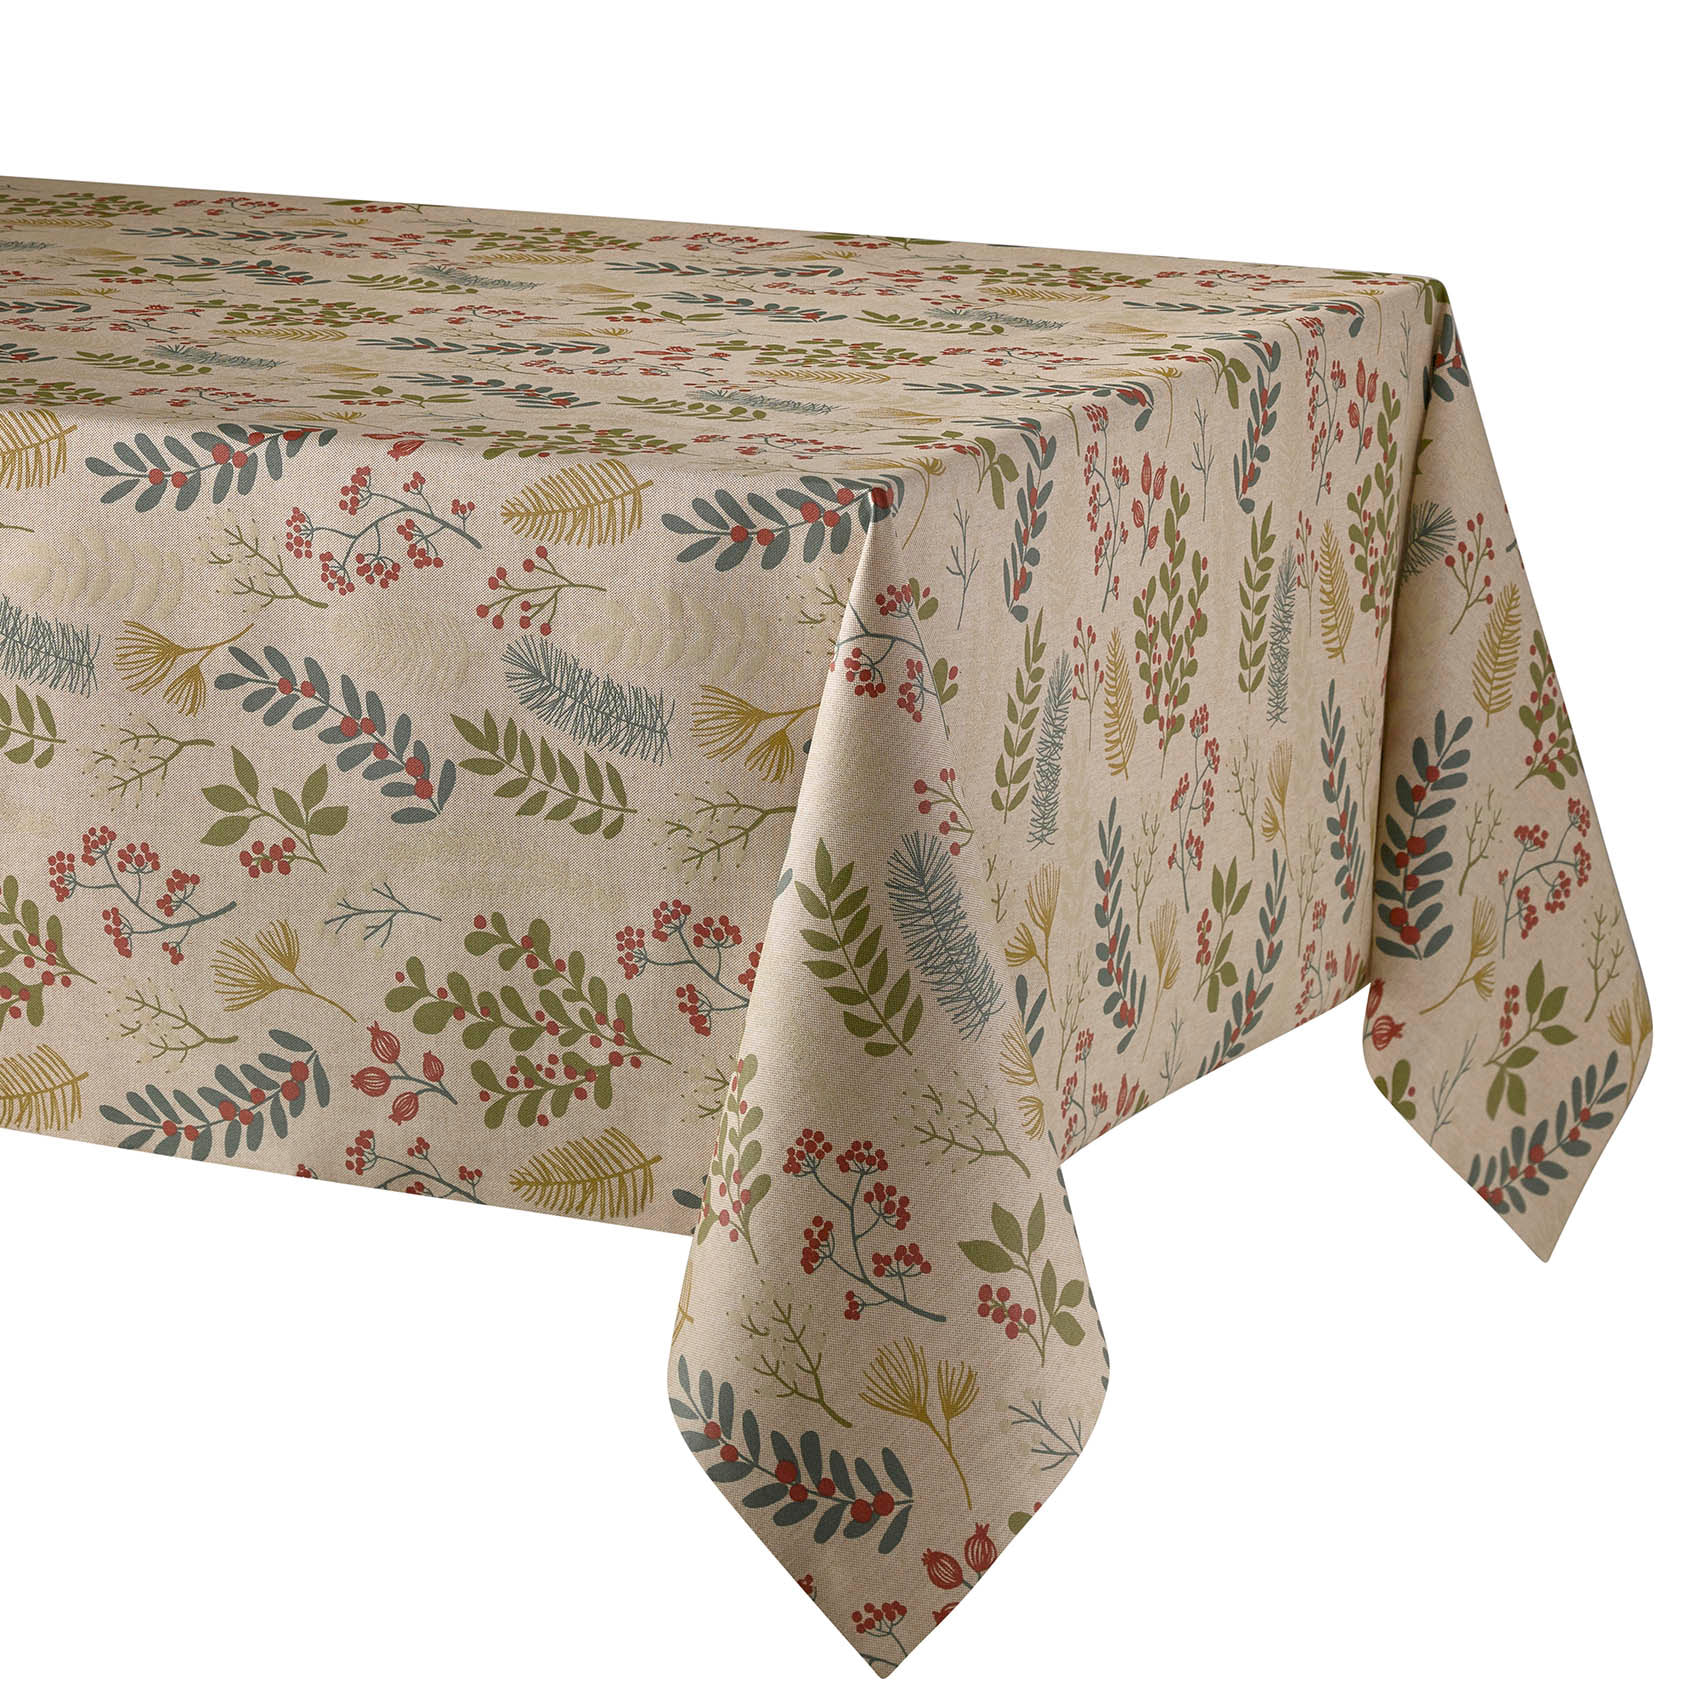 HOLLY Acrylic Coated French Provence Tablecloth French Oilcloth Indoor ...